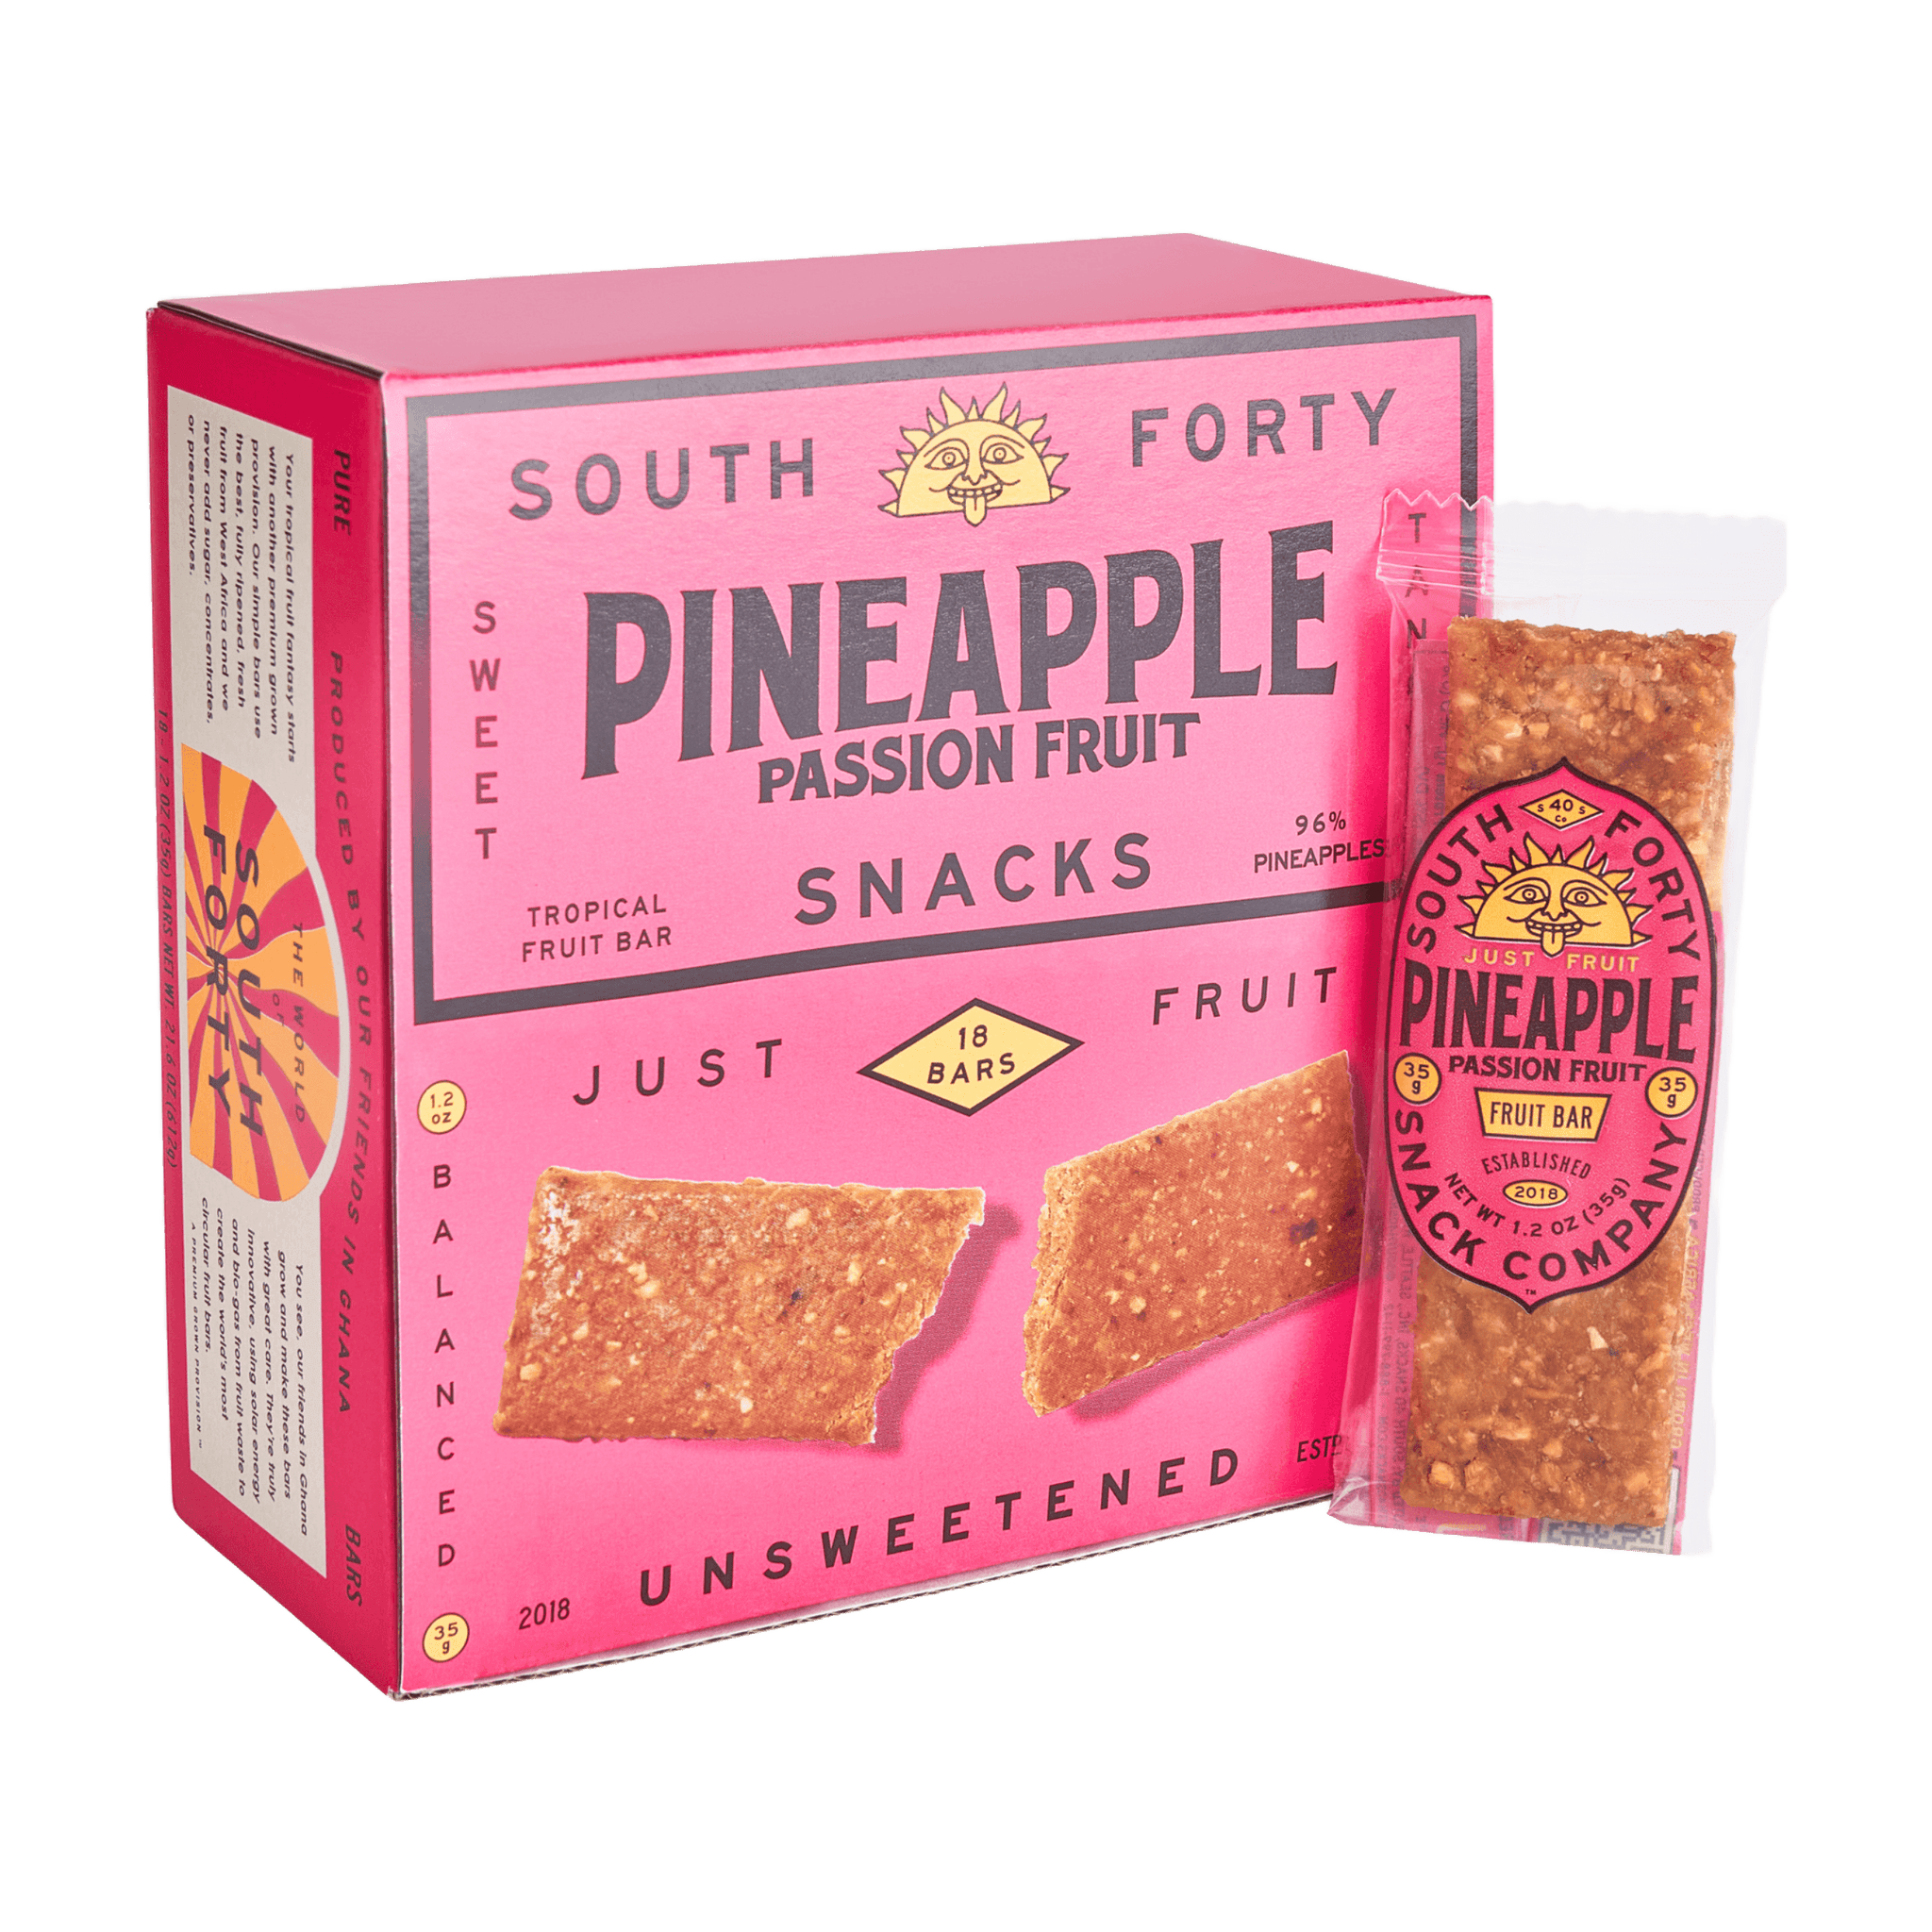 Pineapple Passion Fruit 18-Pack